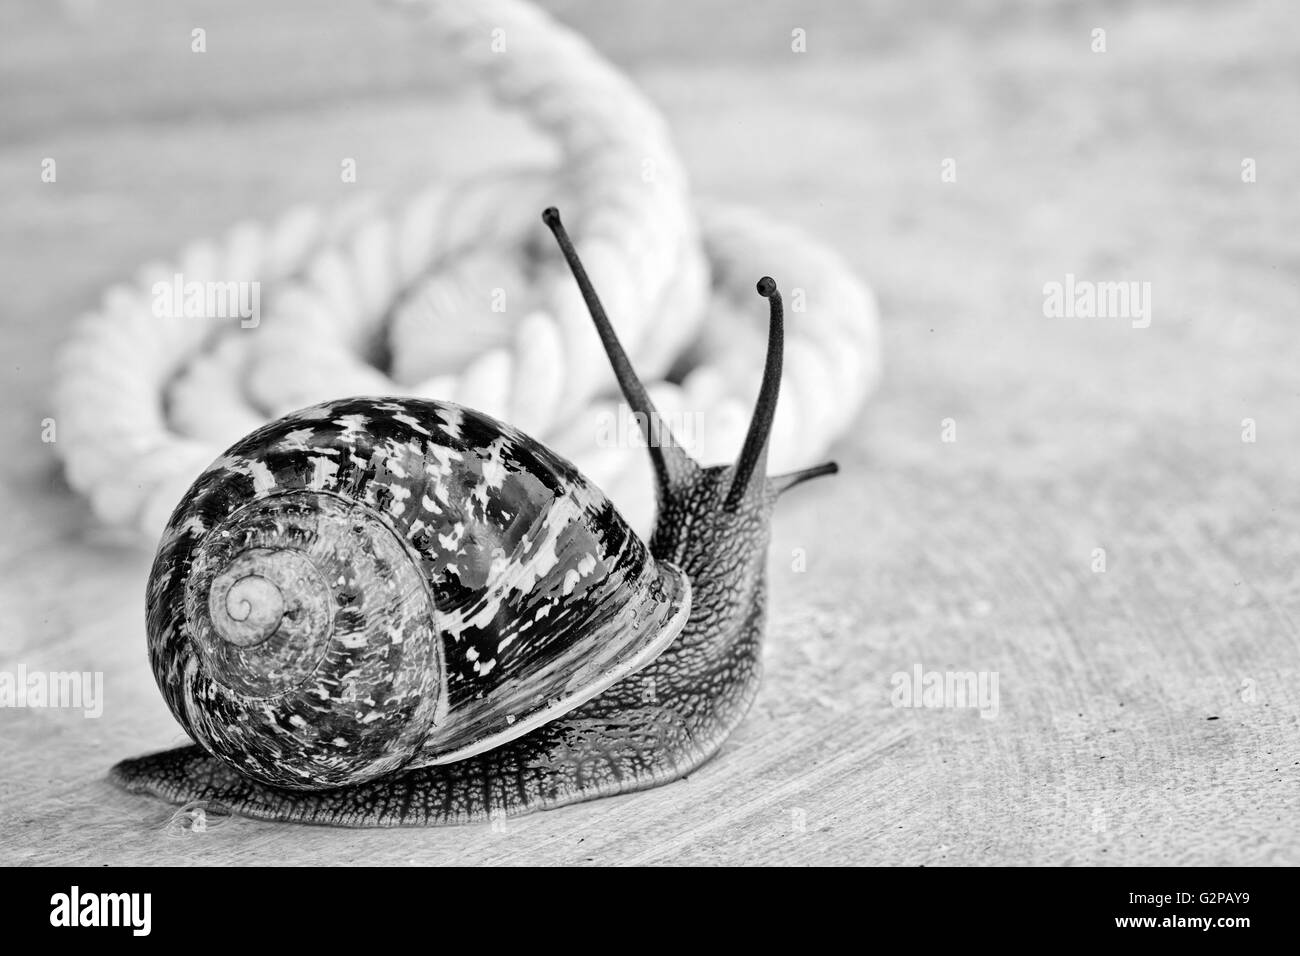 Snail crawling on table, looking around curiously Stock Photo